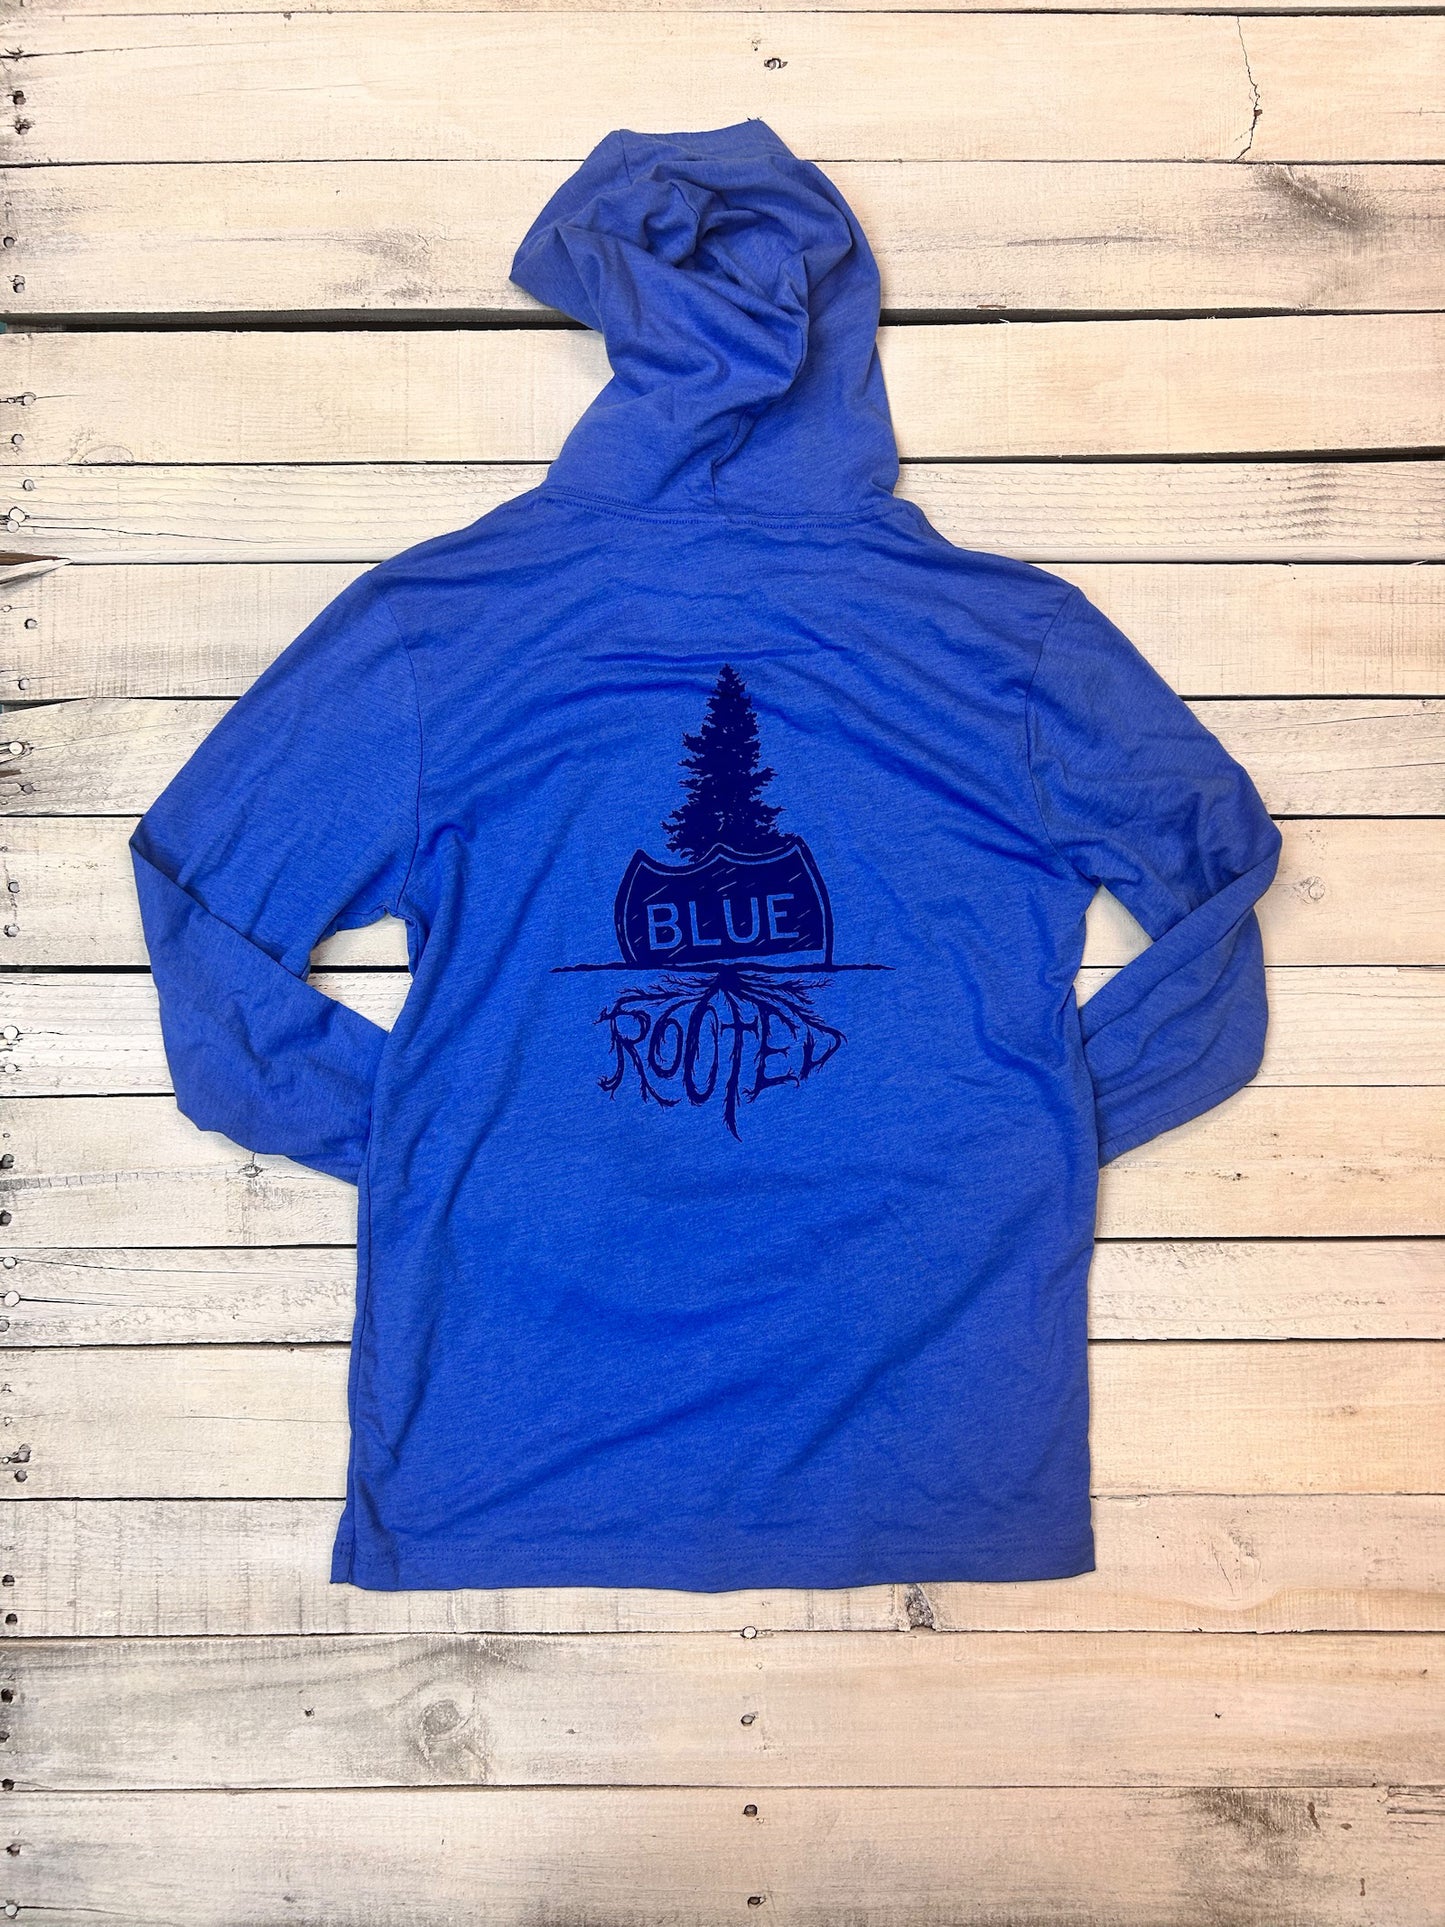 DELCO Tuna Riptide Blue Hooded Long Sleever